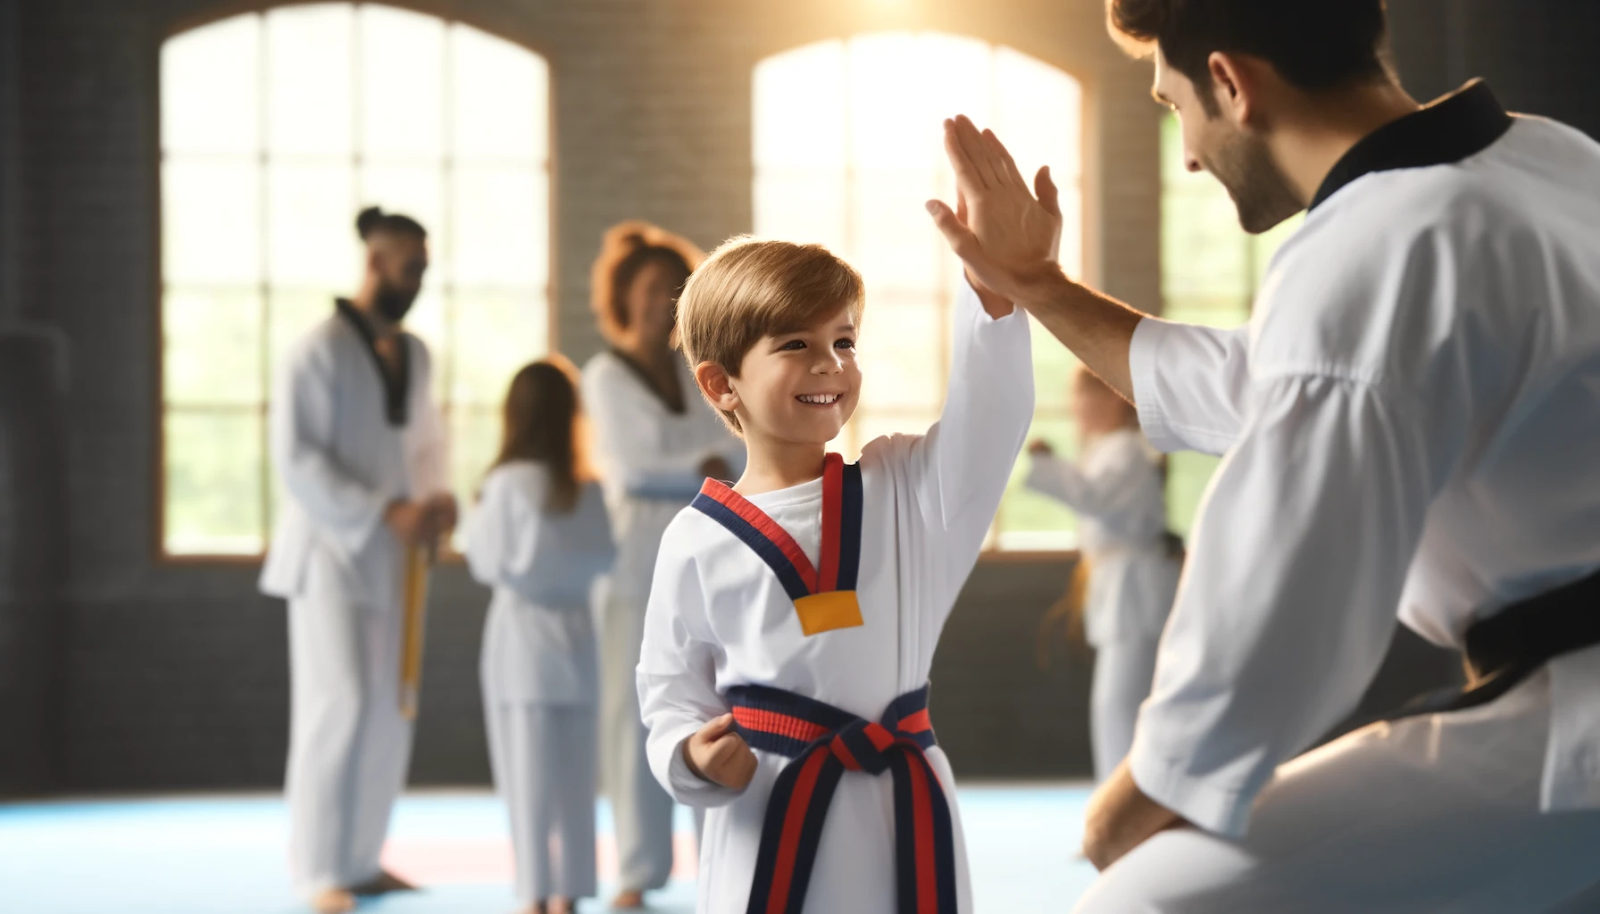 An image of a taekwondo instructor motivating his student.